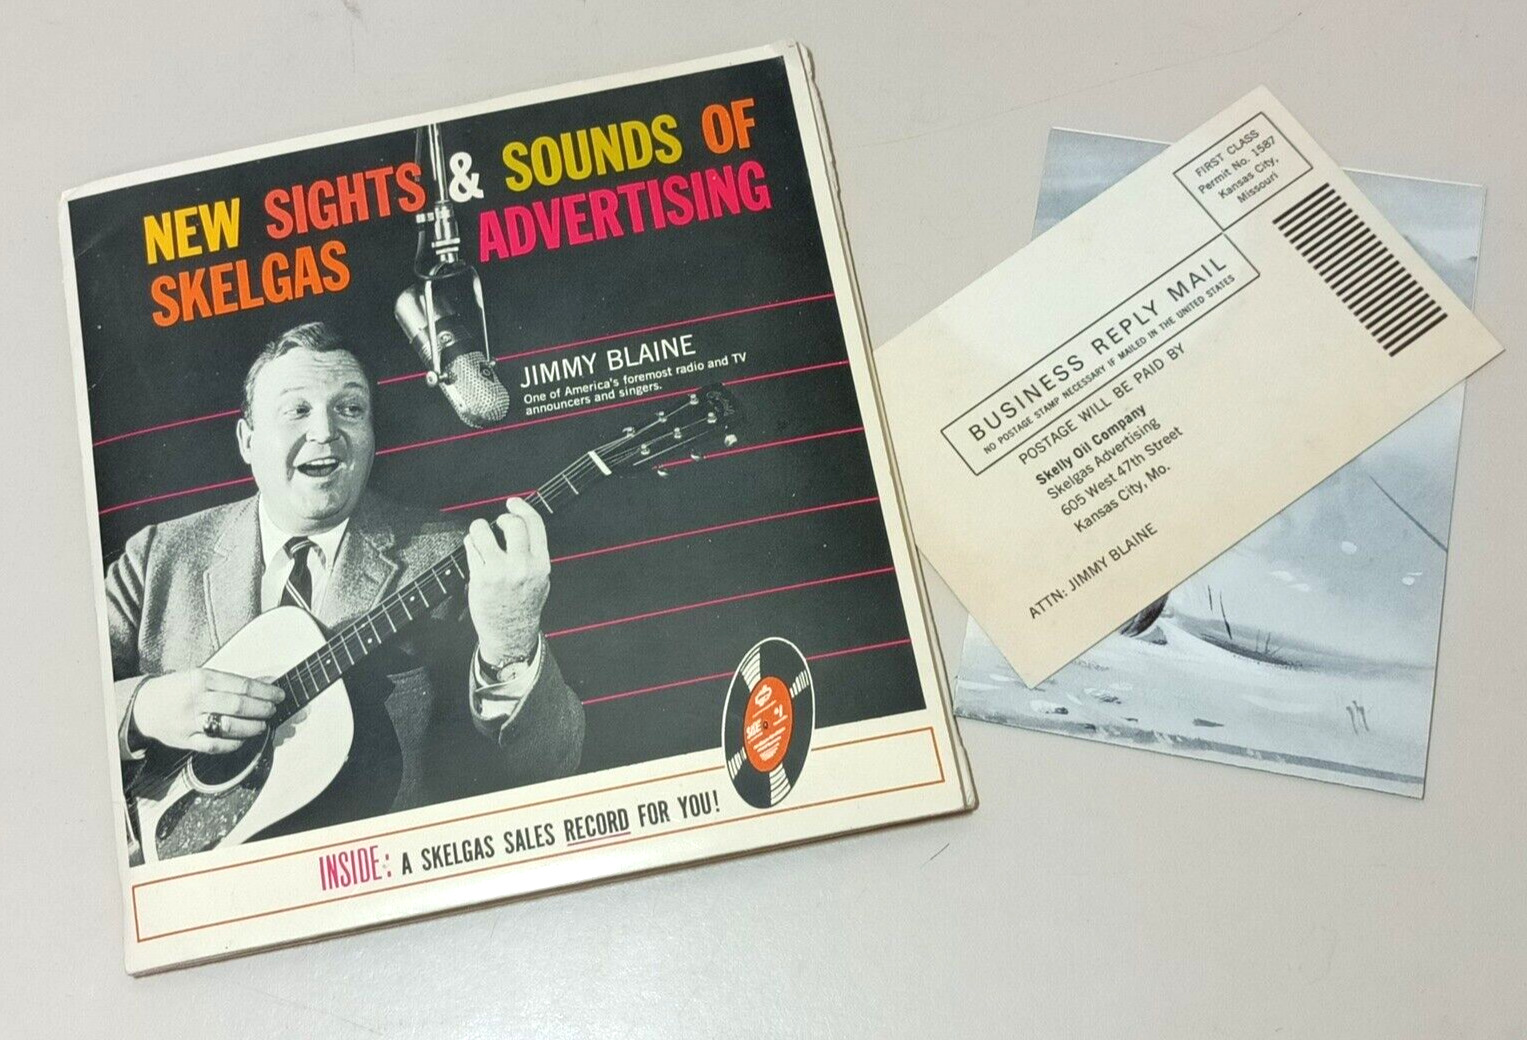 Vintage Skelgas Advertising Record LP with Brochures Jimmy Blaine 33 1/3 RPM 